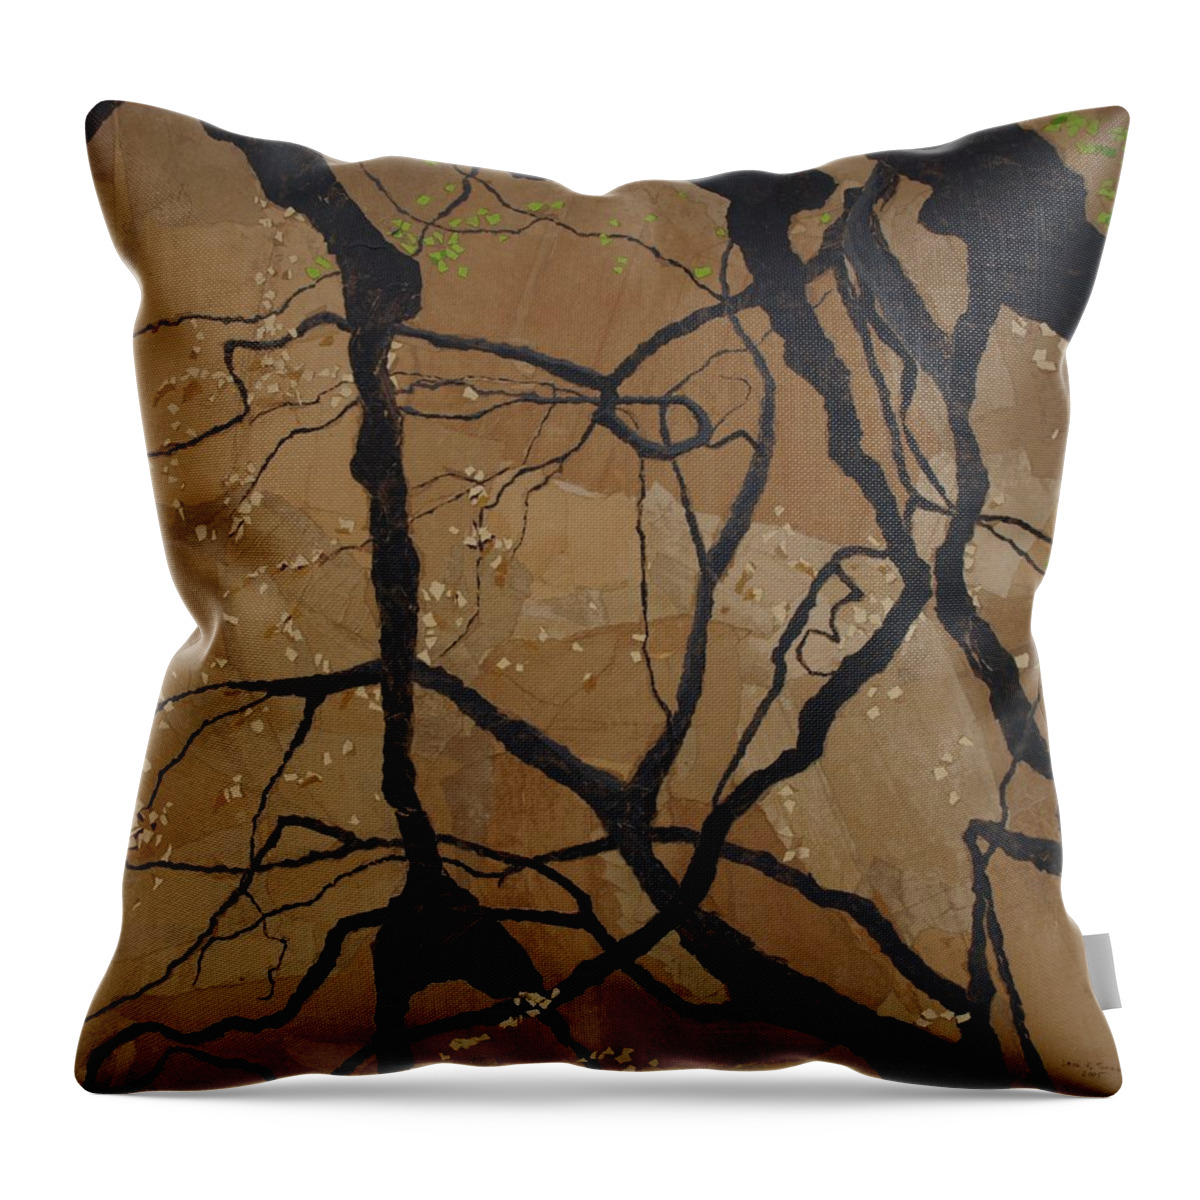 Abstract Tree Branches Throw Pillow featuring the painting Arboretum Dancers by Leah Tomaino